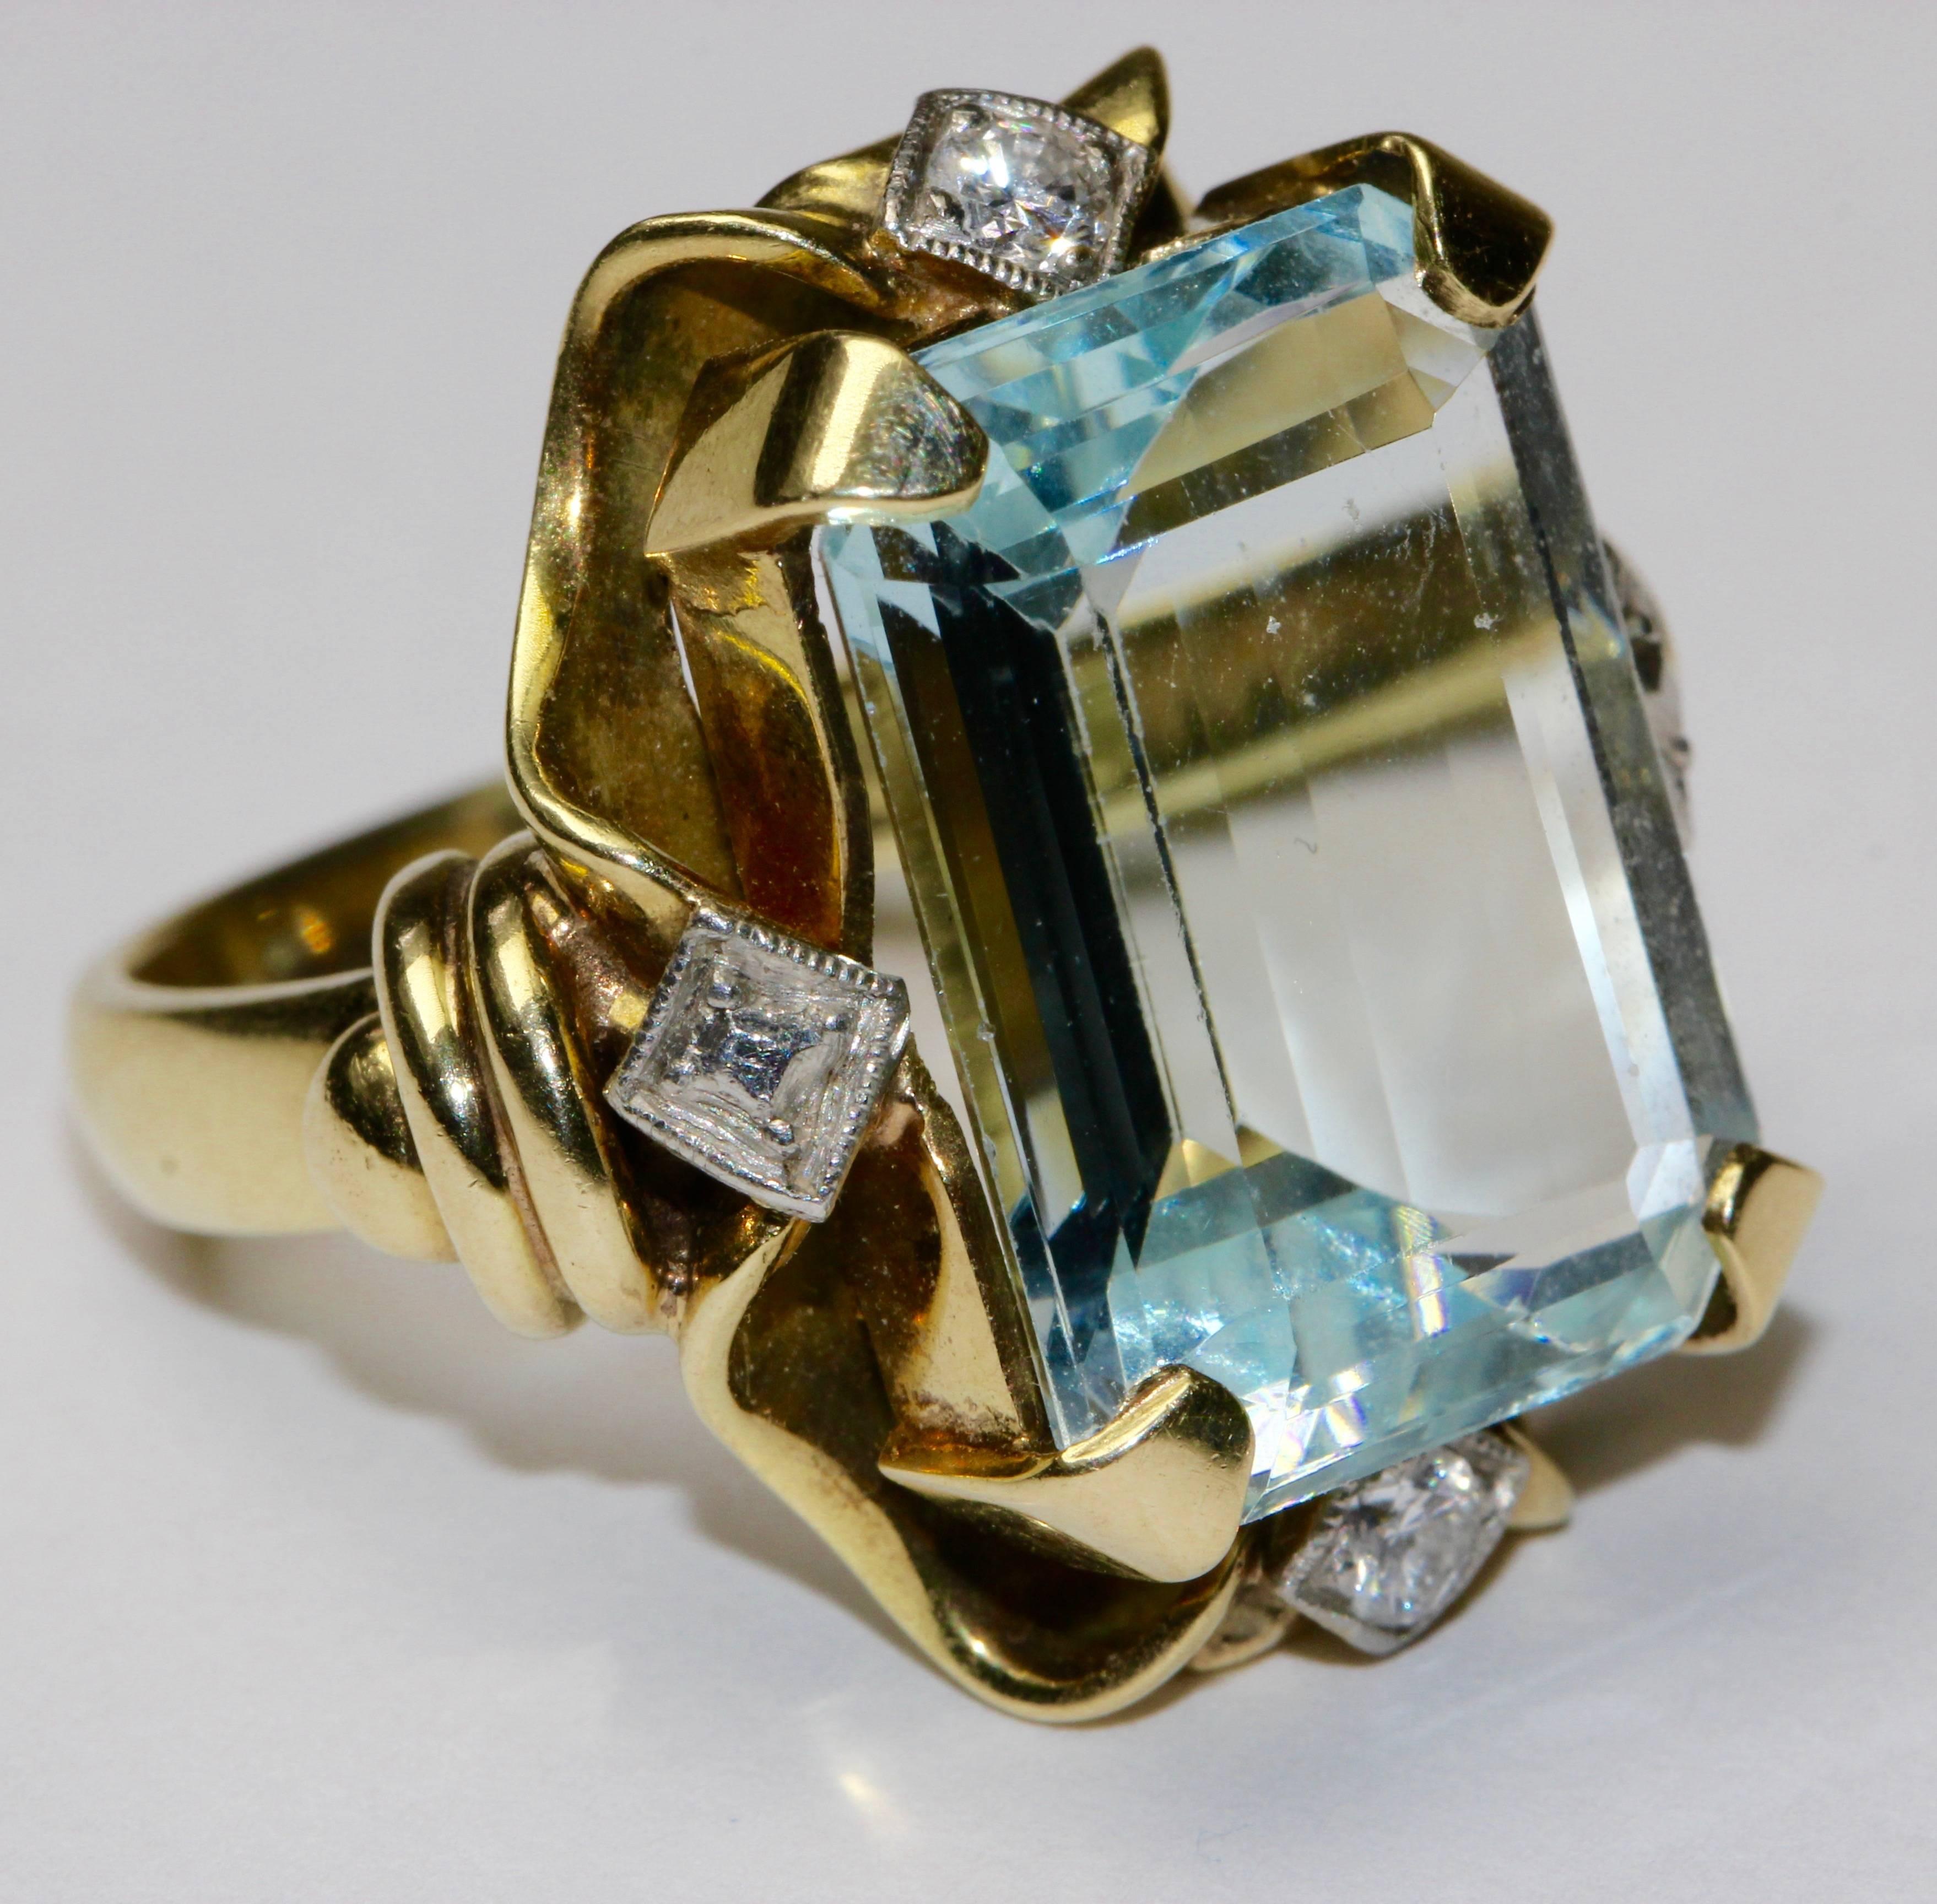 Women's 14K gold ring with large aquamarine and two brilliants